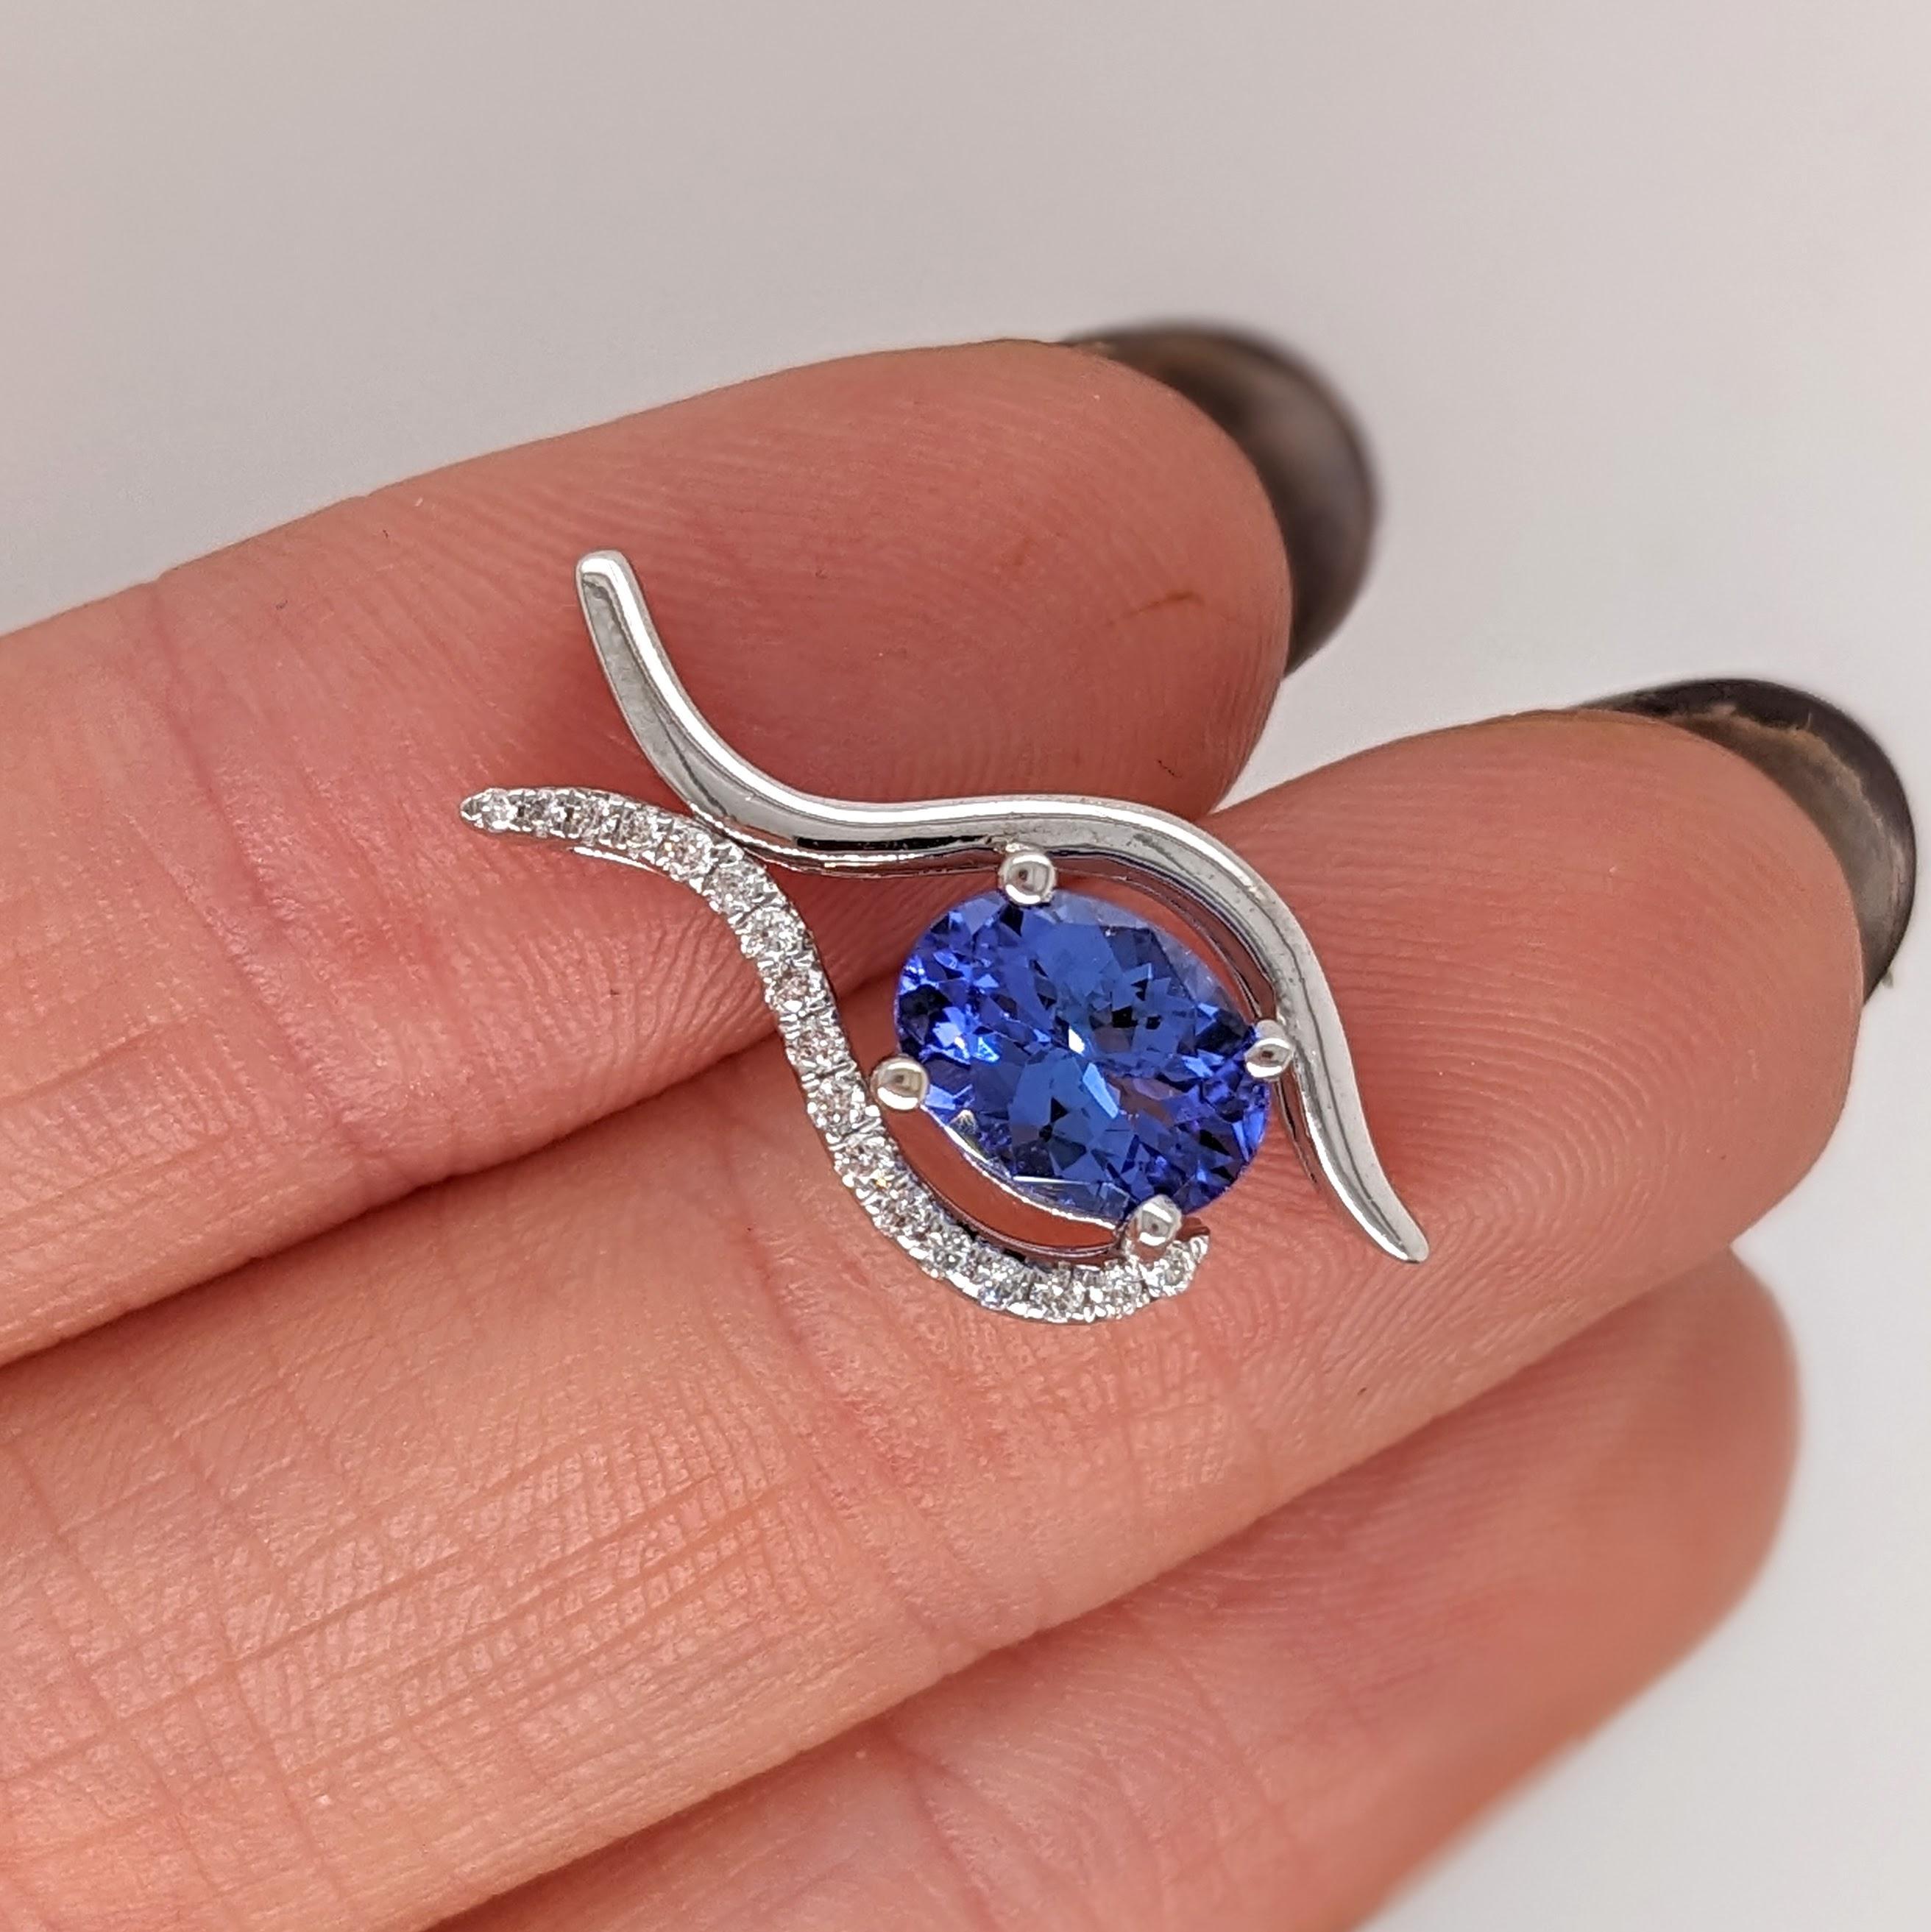 This unique pendant features a 1.26 carat oval tanzanite with natural earth mined diamonds, all set in solid 14K gold. This pendant can be a beautiful December birthstone gift for your loved ones! 

Specifications

Item Type: Pendant
Center